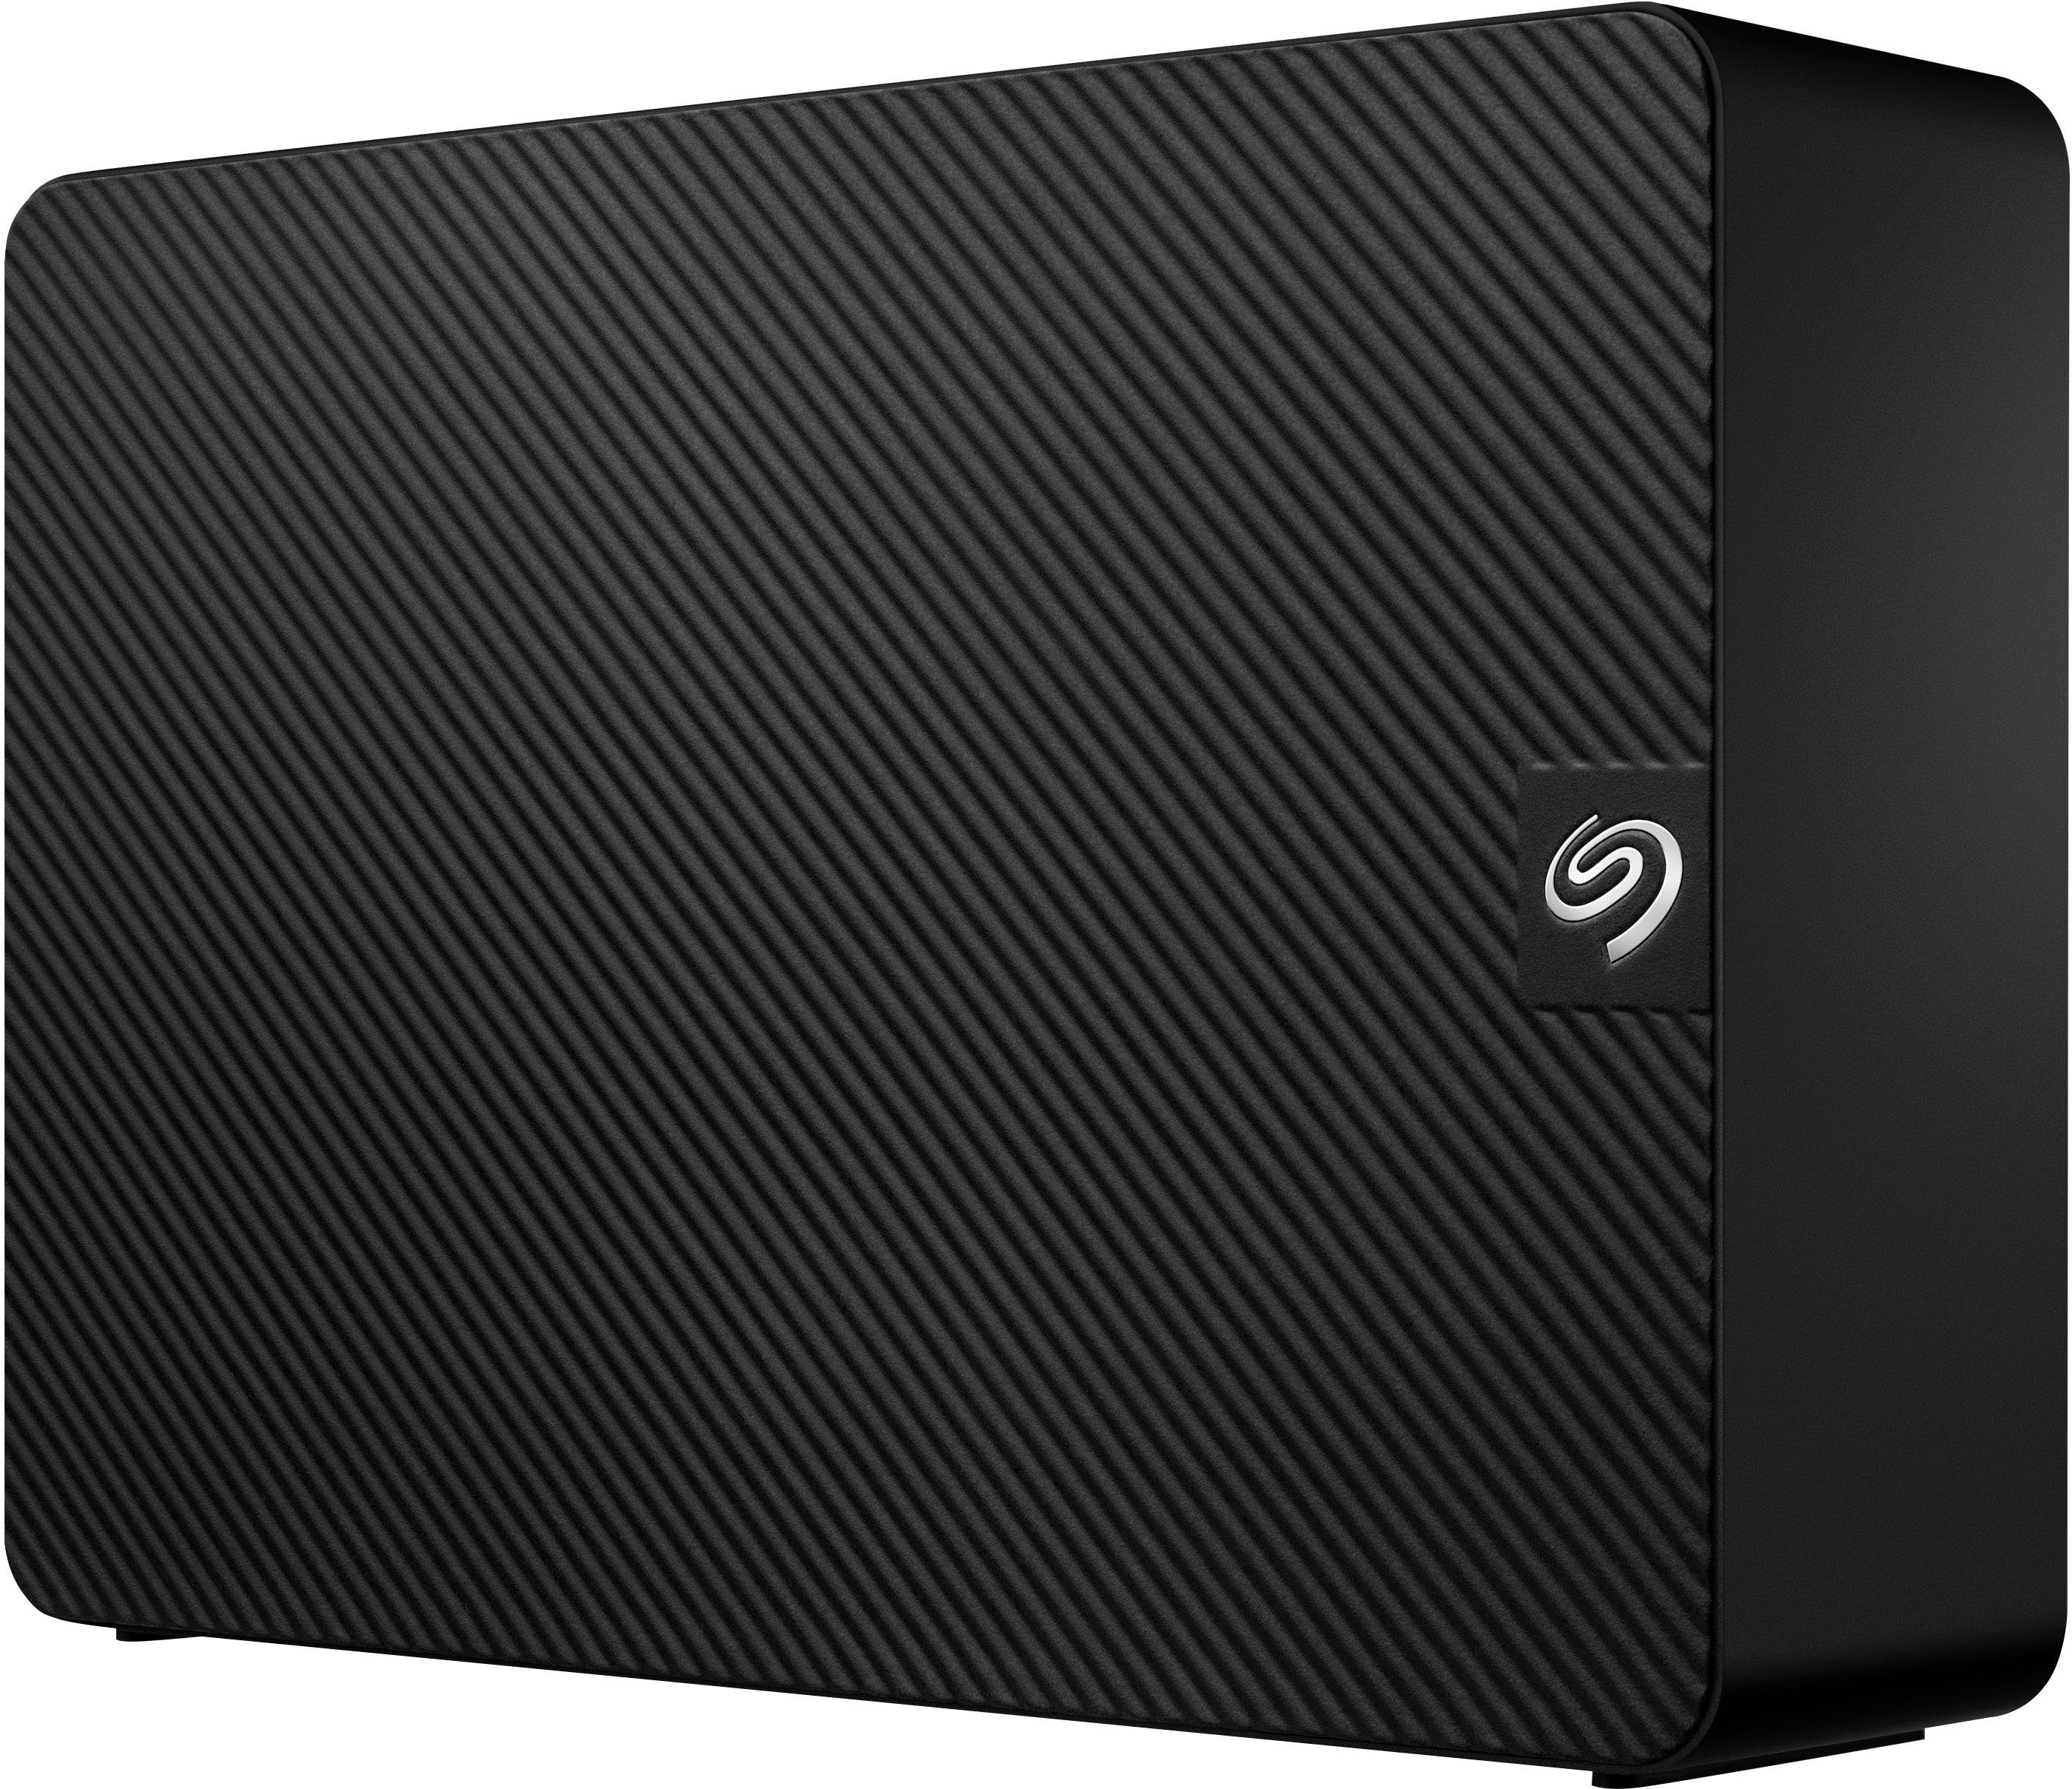 Angle View: Seagate - Expansion 18TB External USB 3.0 Portable Hard Drive with Rescue Data Recovery Services - Black